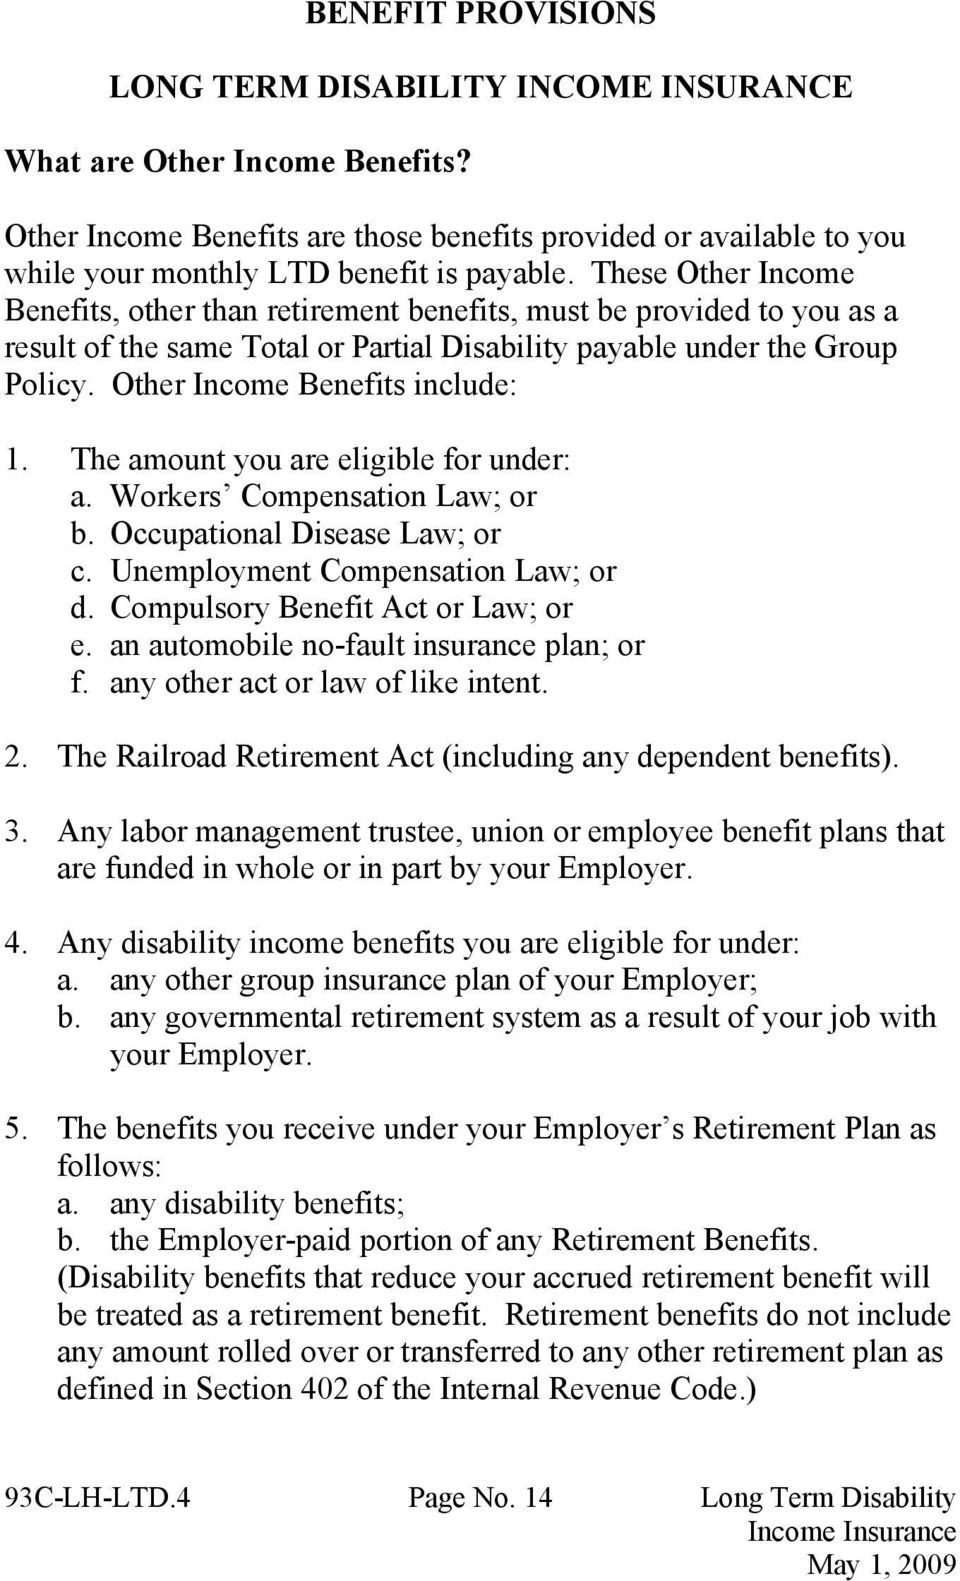 These Other Income Benefits, other than retirement benefits, must be provided to you as a result of the same Total or Partial Disability payable under the Group Policy.